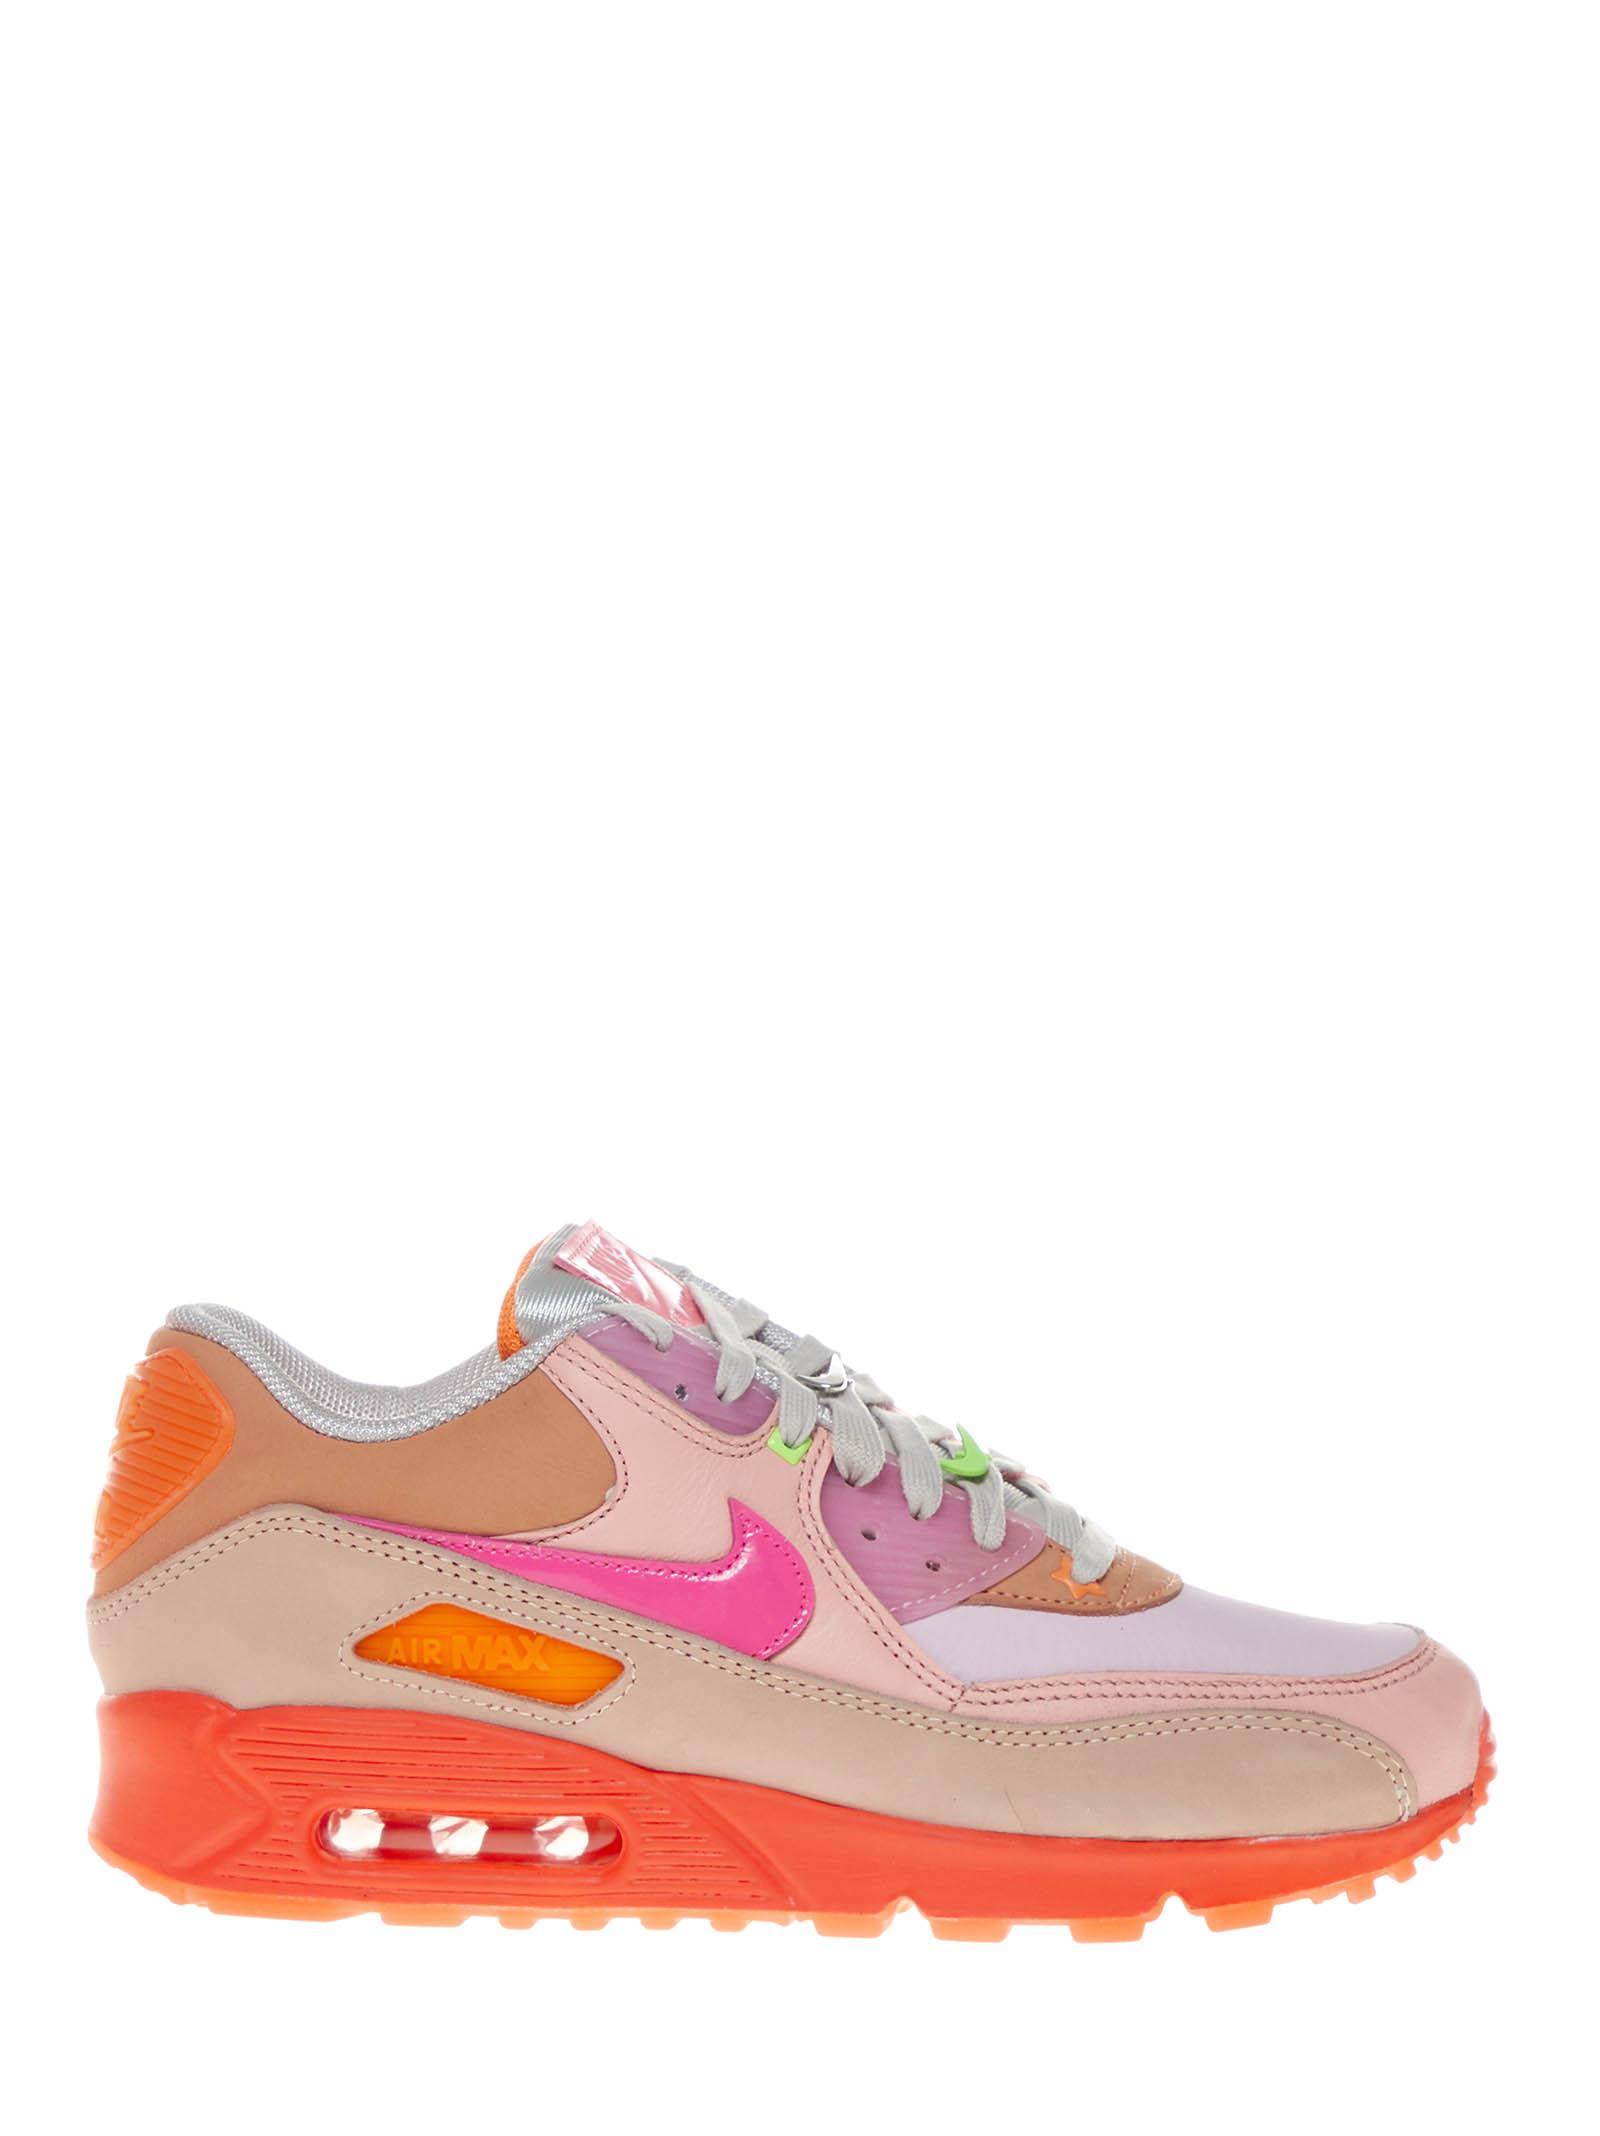 Medisch eiwit Getuigen Nike Pink And Orange Air Max 90 Sneakers With Layered Design And Integrated  Air Technology. | Lyst